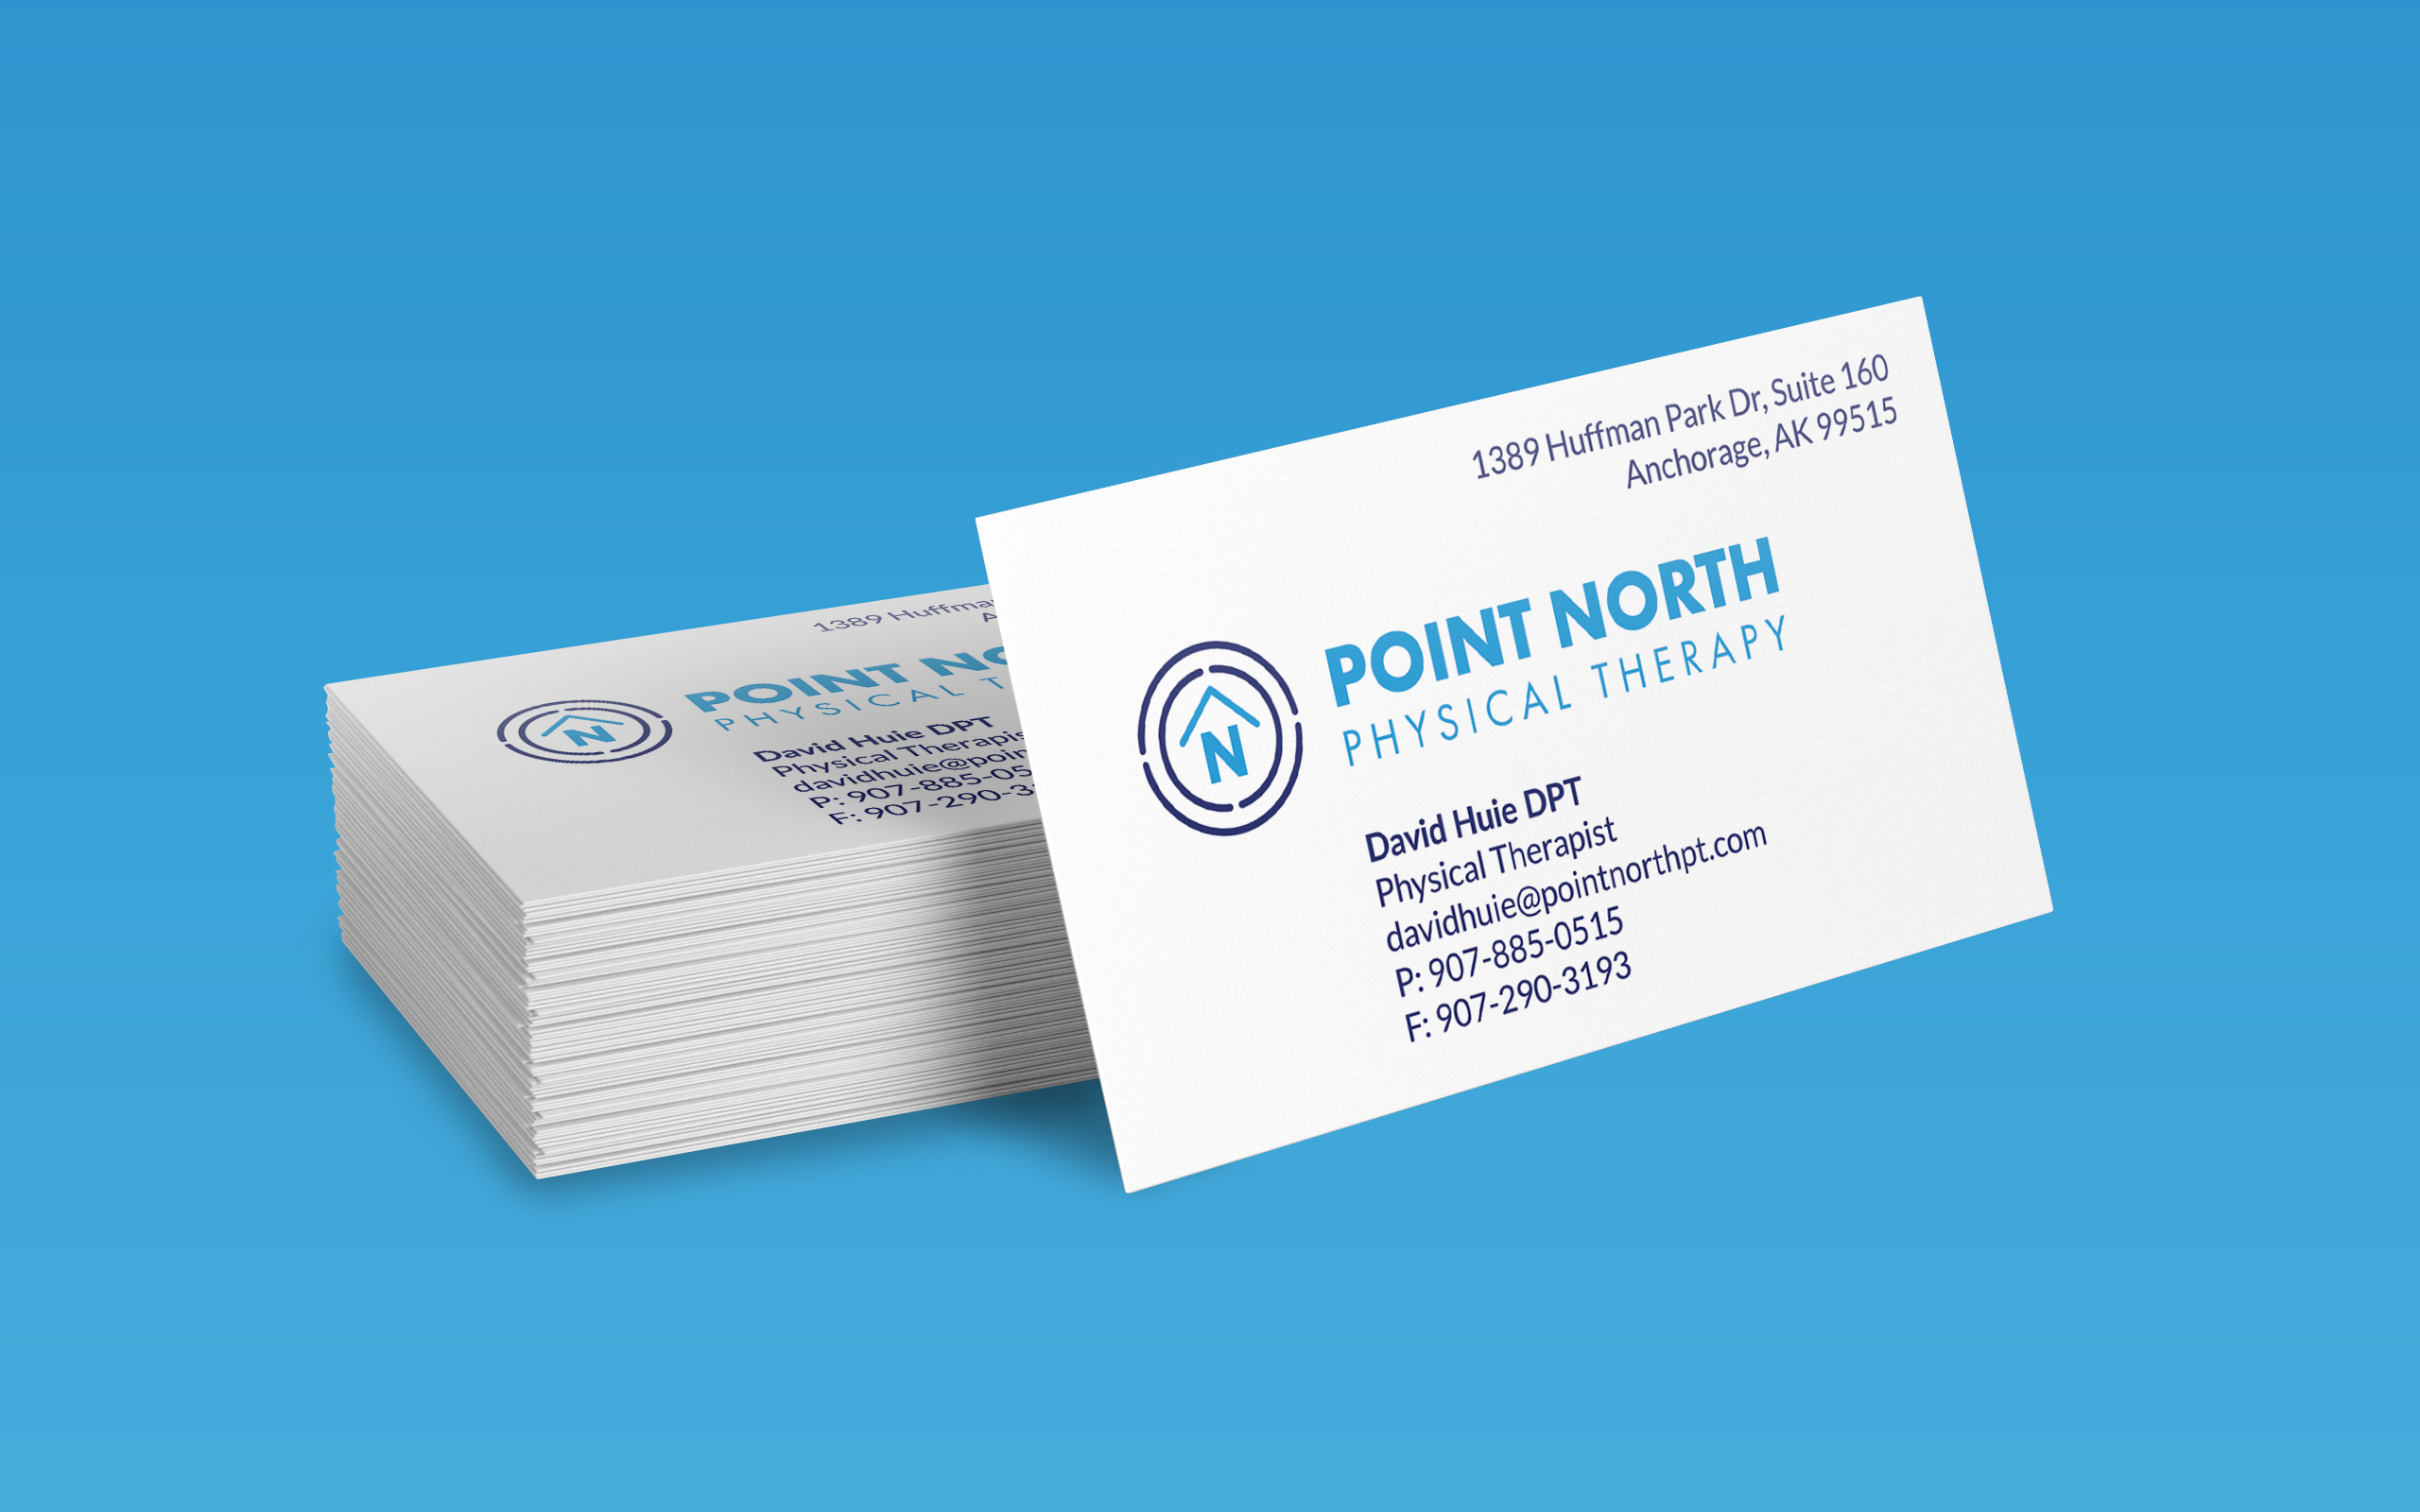 Point North Physical Therapy